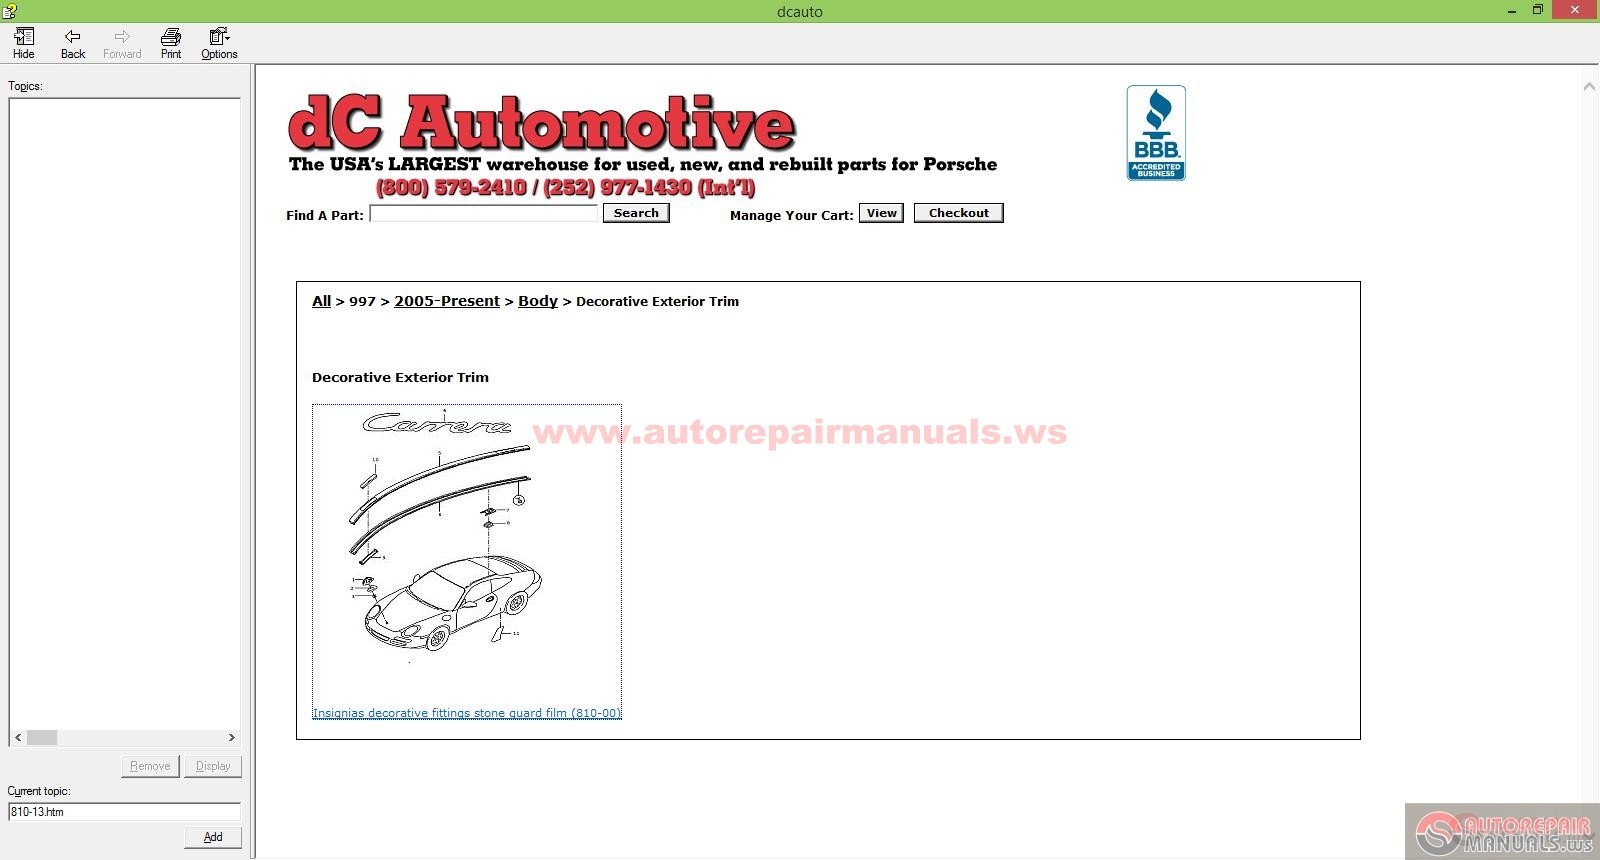 Spare Parts for all Porsche models for almost all 2008 | Auto Repair